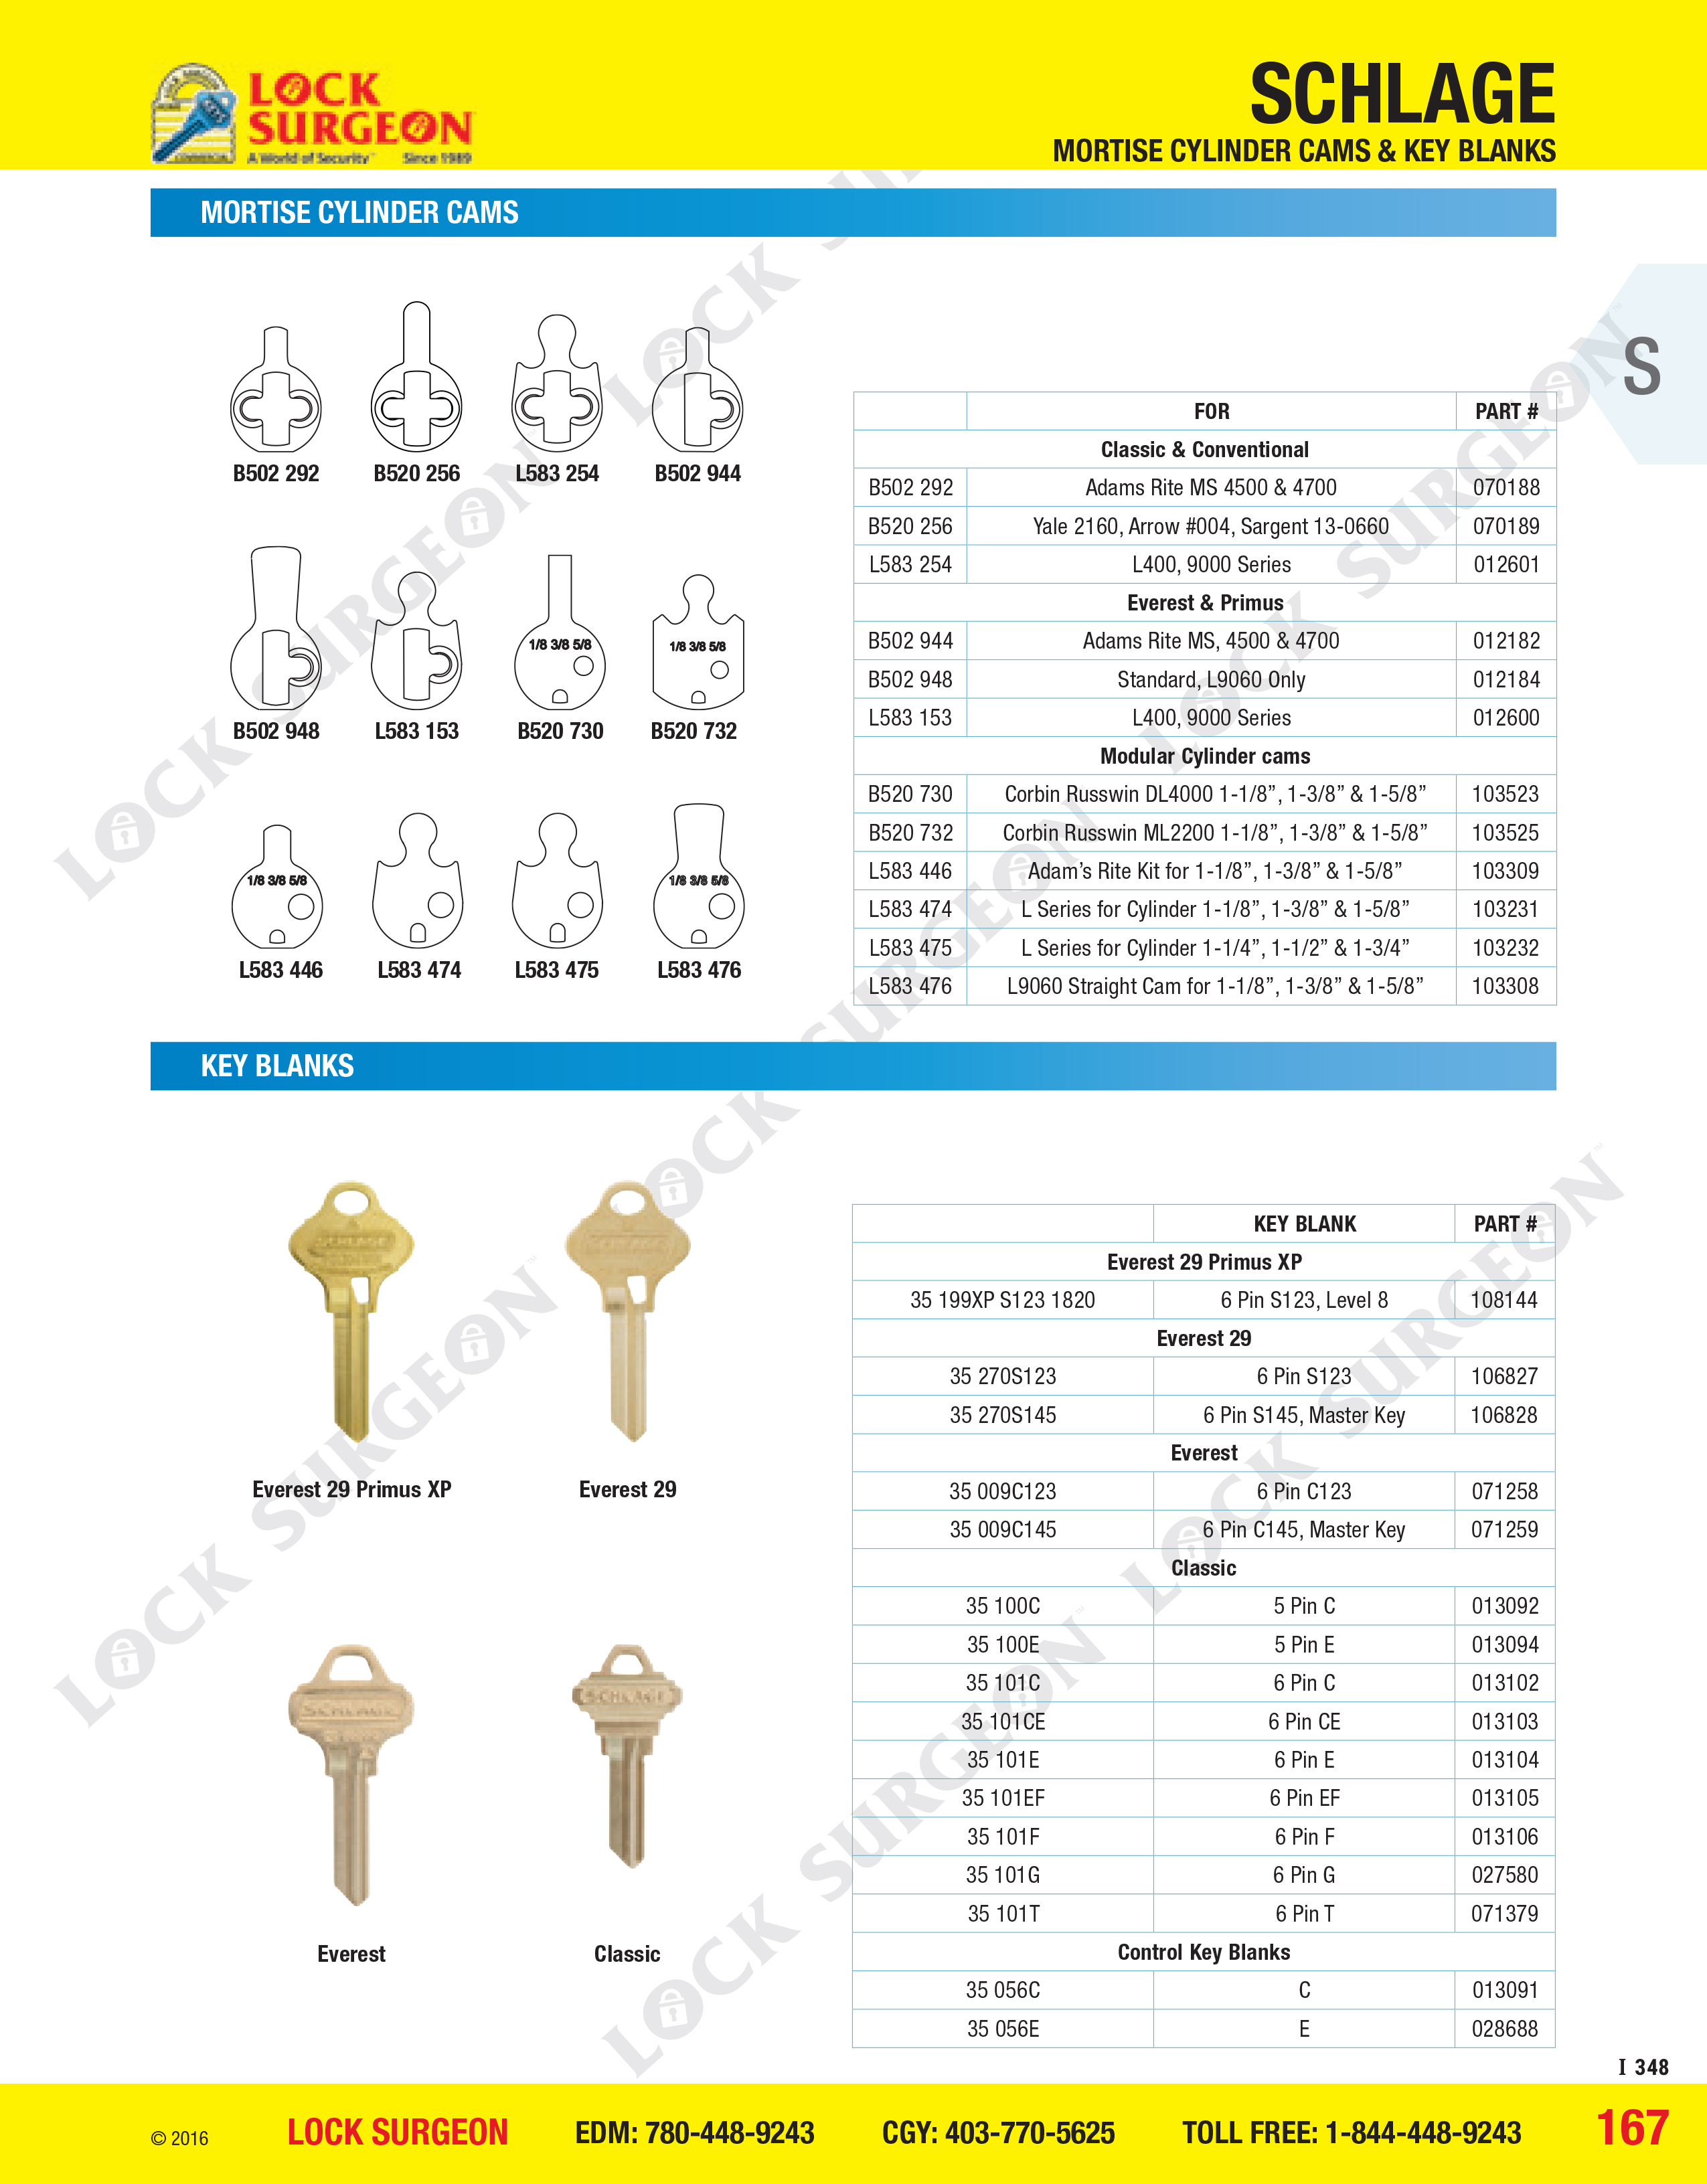 Acheson Mortise cylinder cams and key blanks